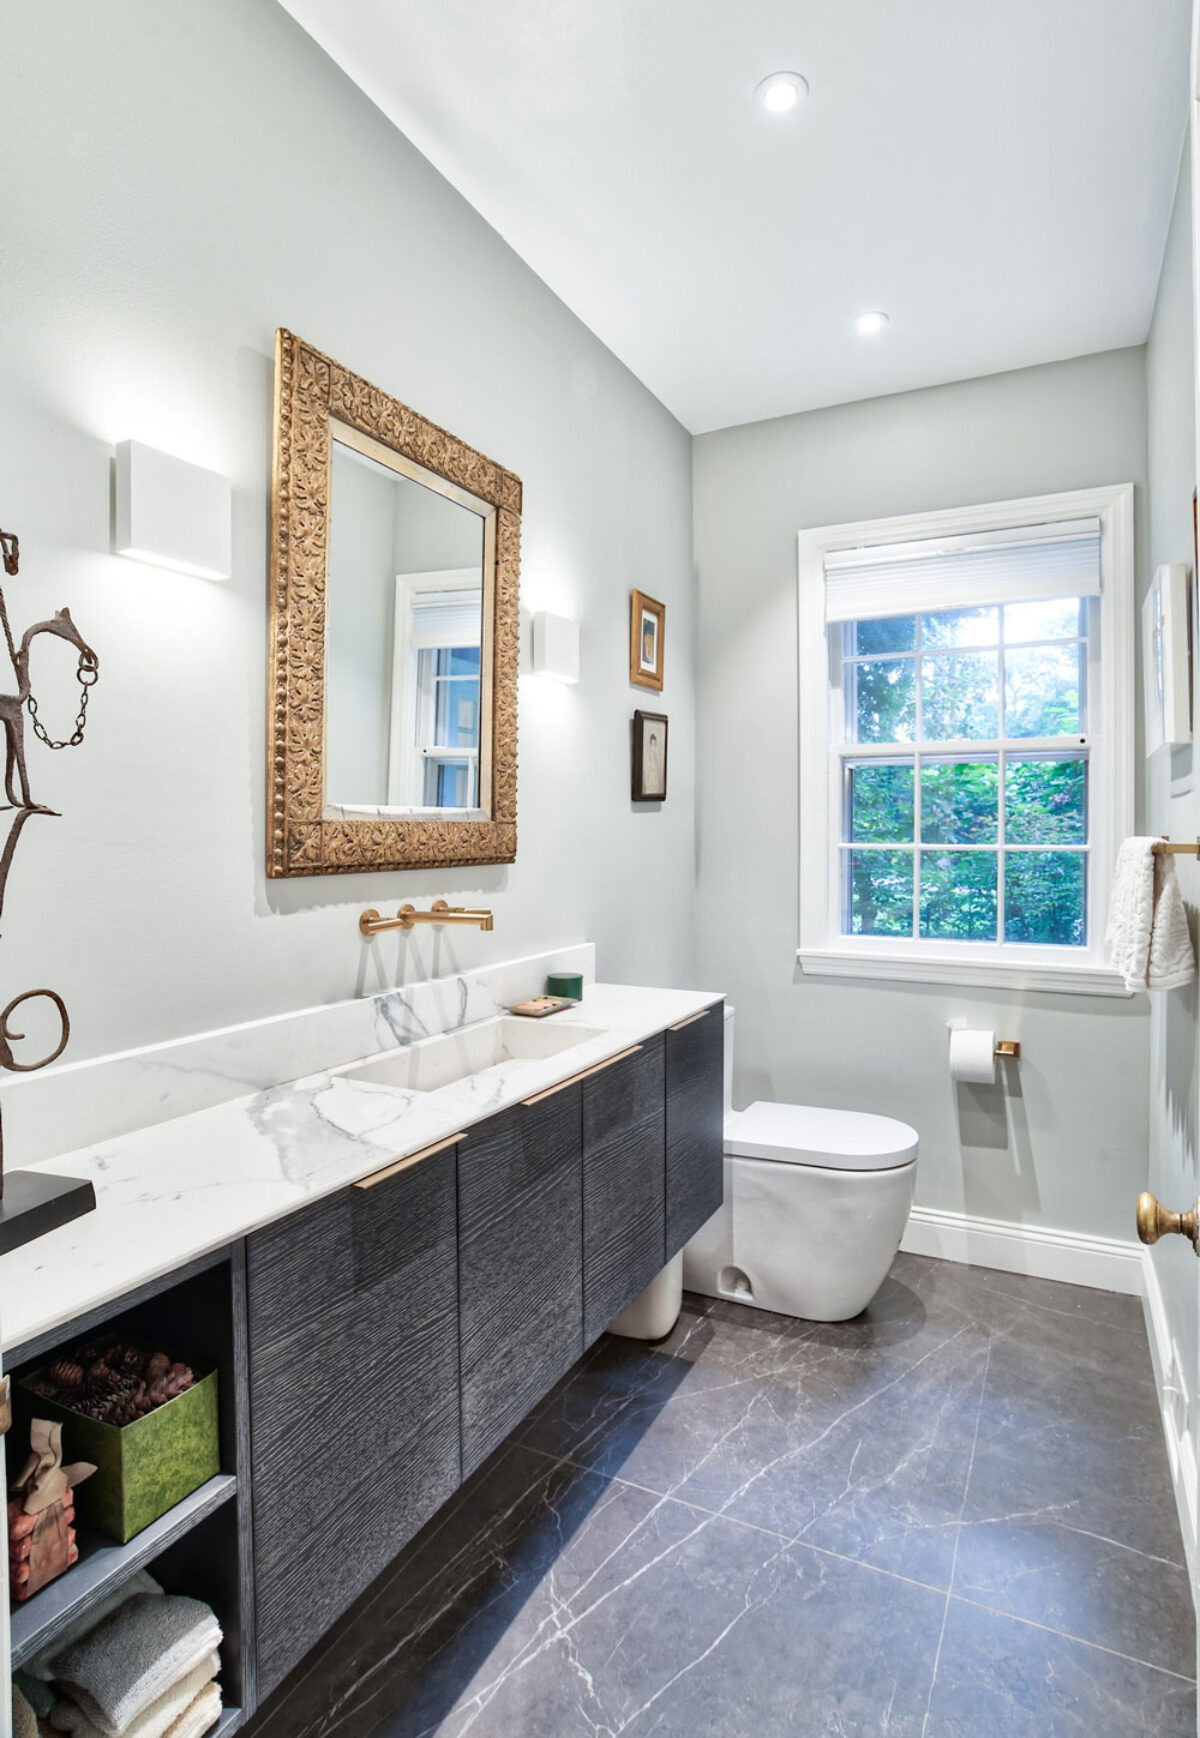 How Much Does Bathroom Renovation Cost, Bathroom Renovation Costs 2021